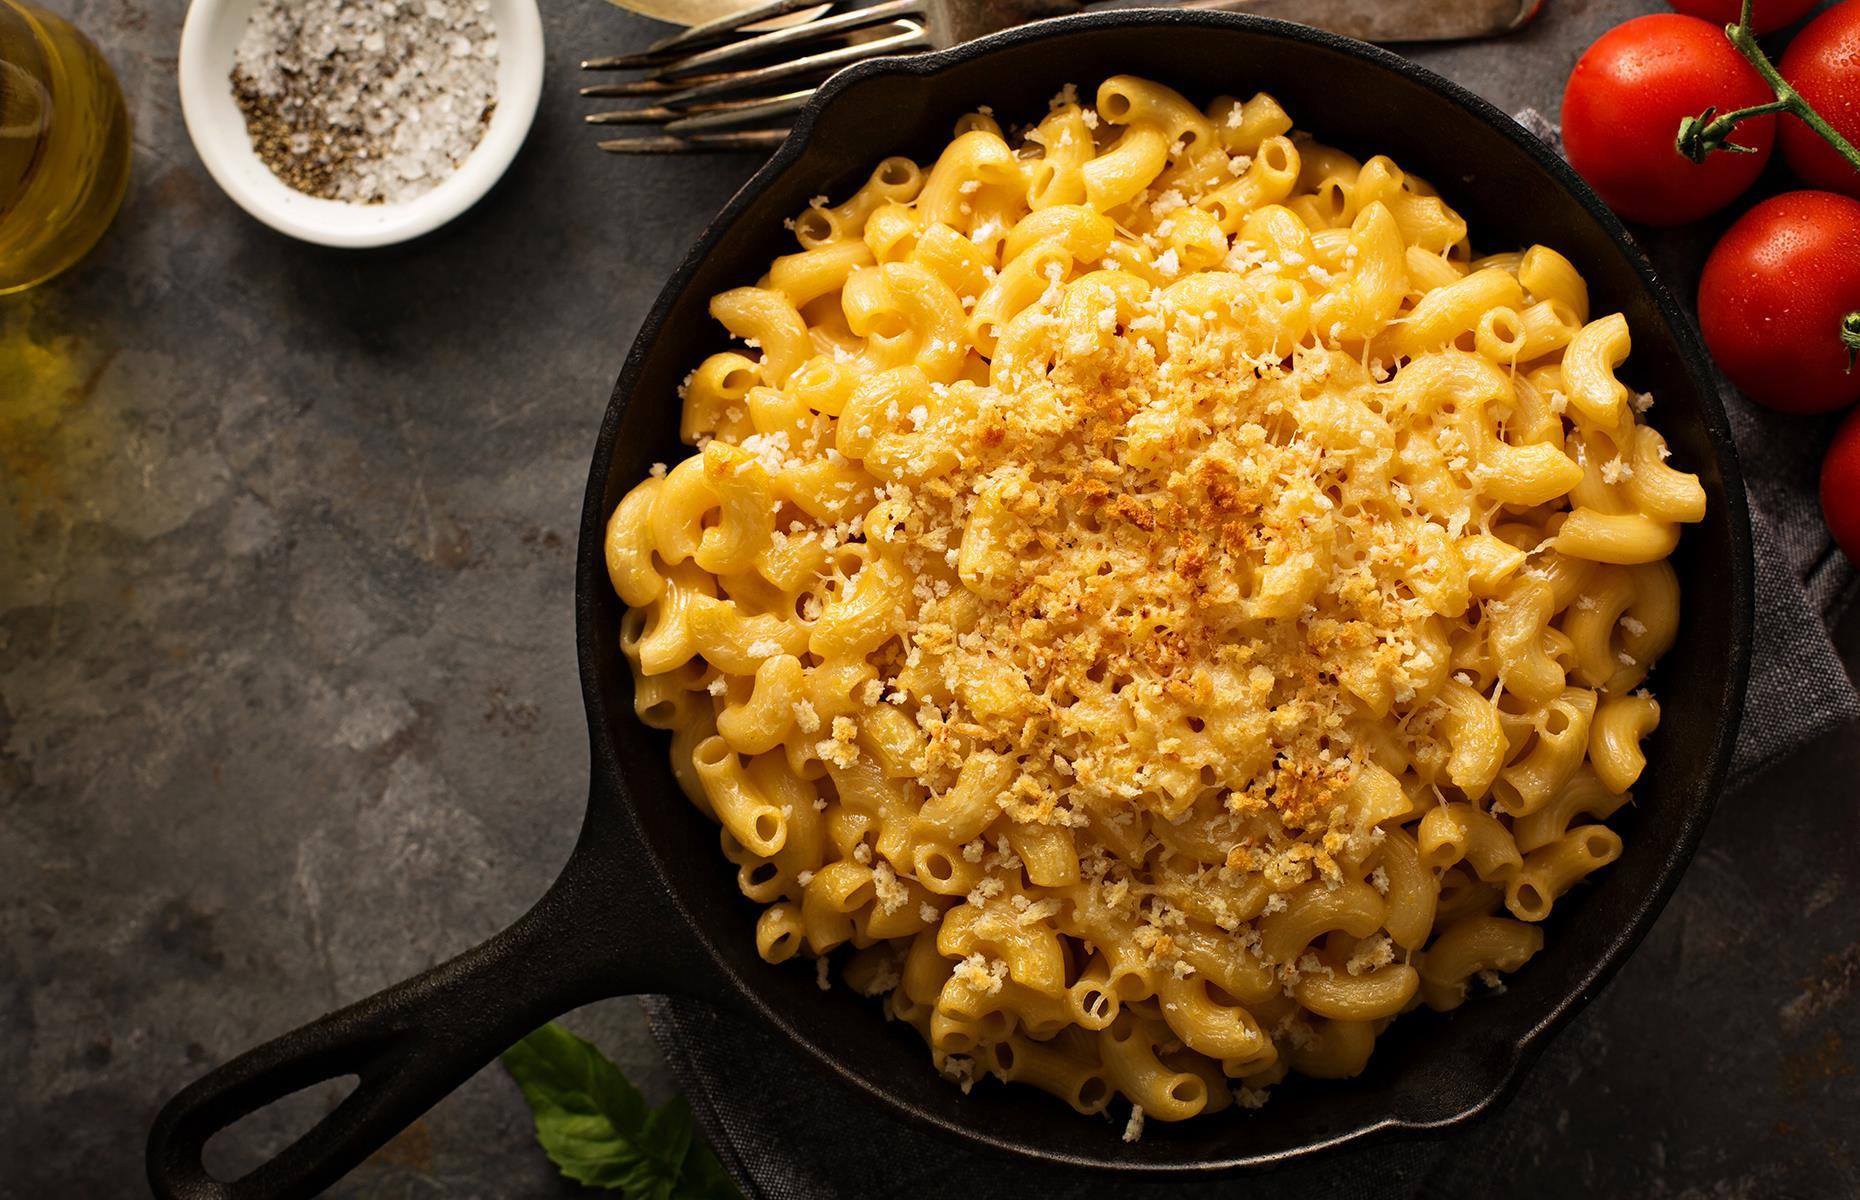 Often overlooked, breadcrumbs are just as important as the pasta, the cheese and the sauce to make the perfect mac 'n' cheese. The trick to achieving the perfect crispy topping is to toast the breadcrumbs before they go in the oven. Melt butter in a skillet over a medium heat, add panko breadcrumbs and toast until they turn a light golden brown.